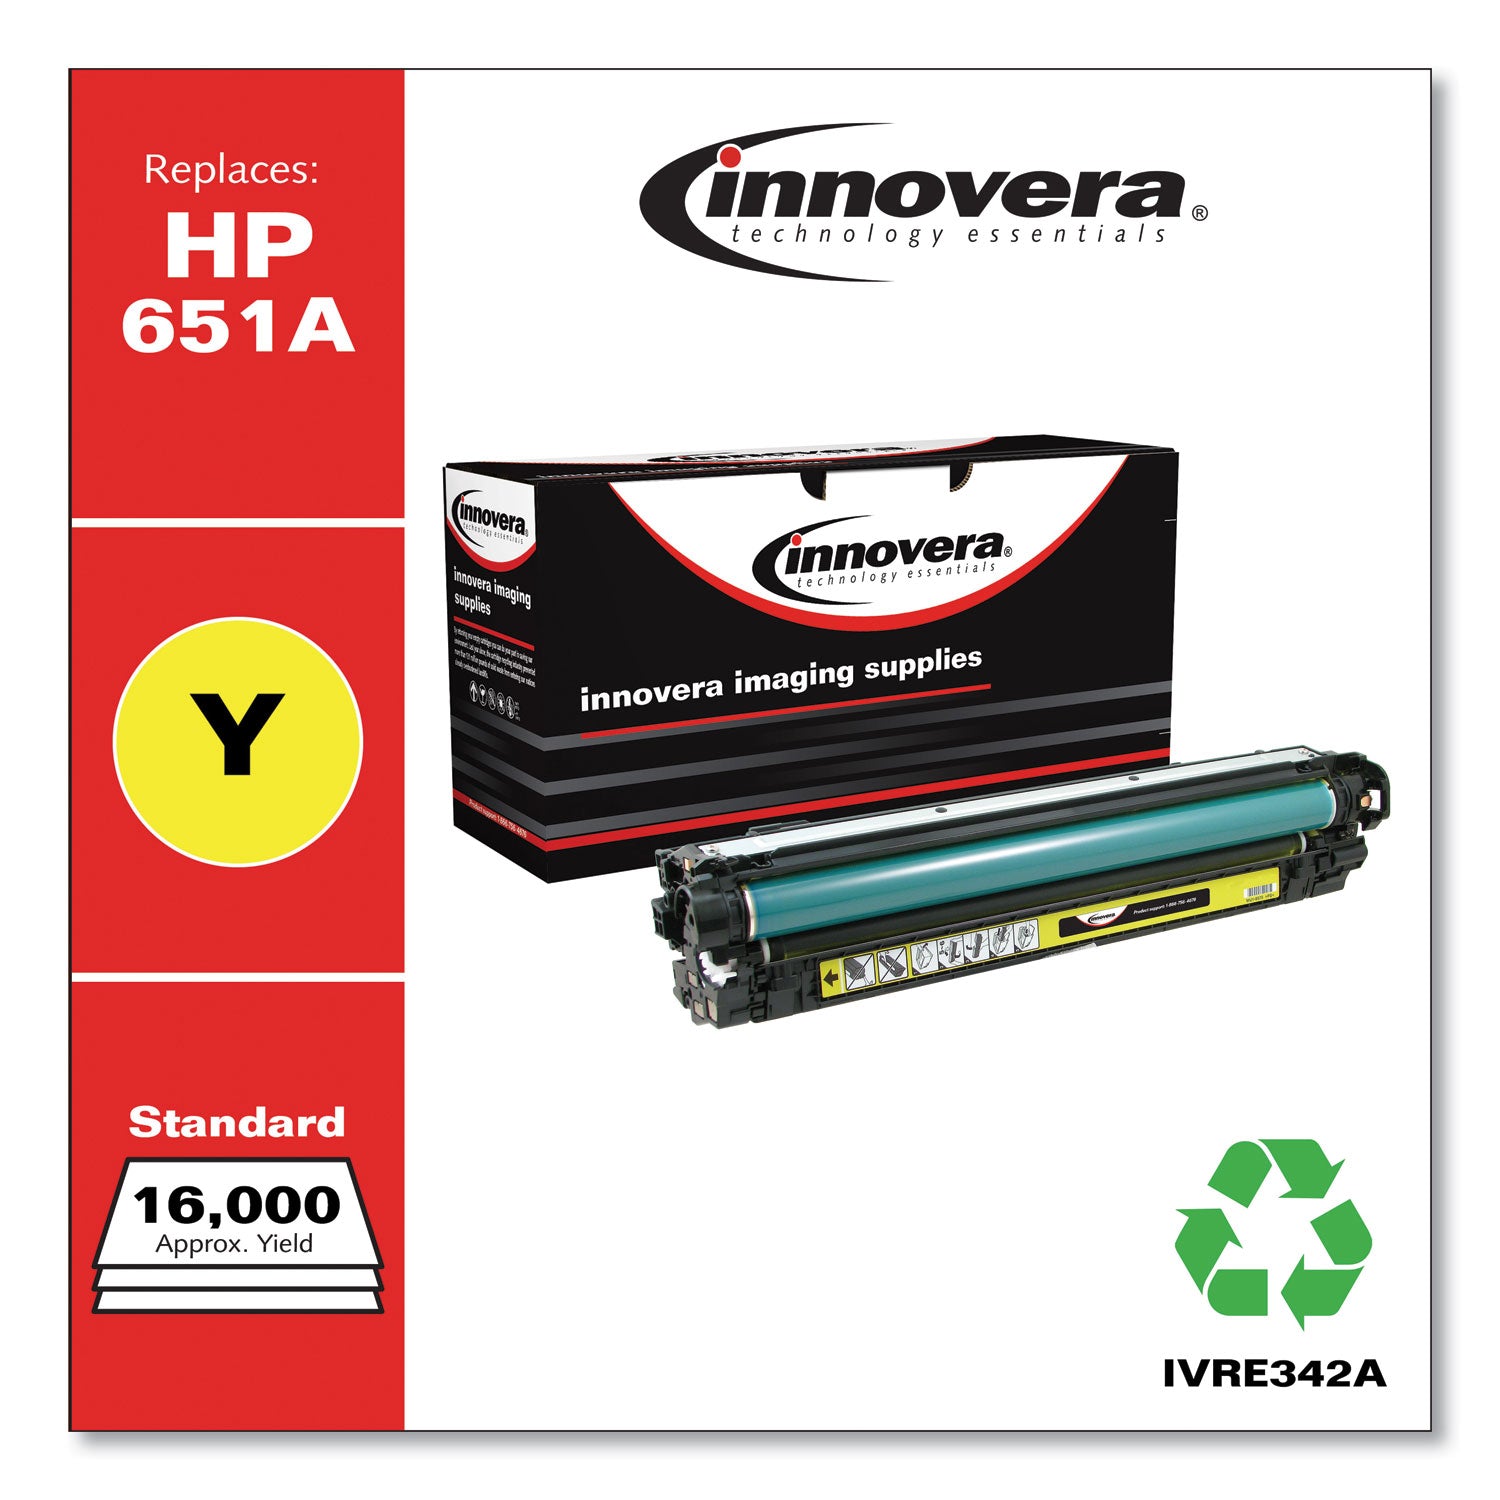 remanufactured-yellow-toner-replacement-for-651a-ce342a-13500-page-yield-ships-in-1-3-business-days_ivre342a - 2